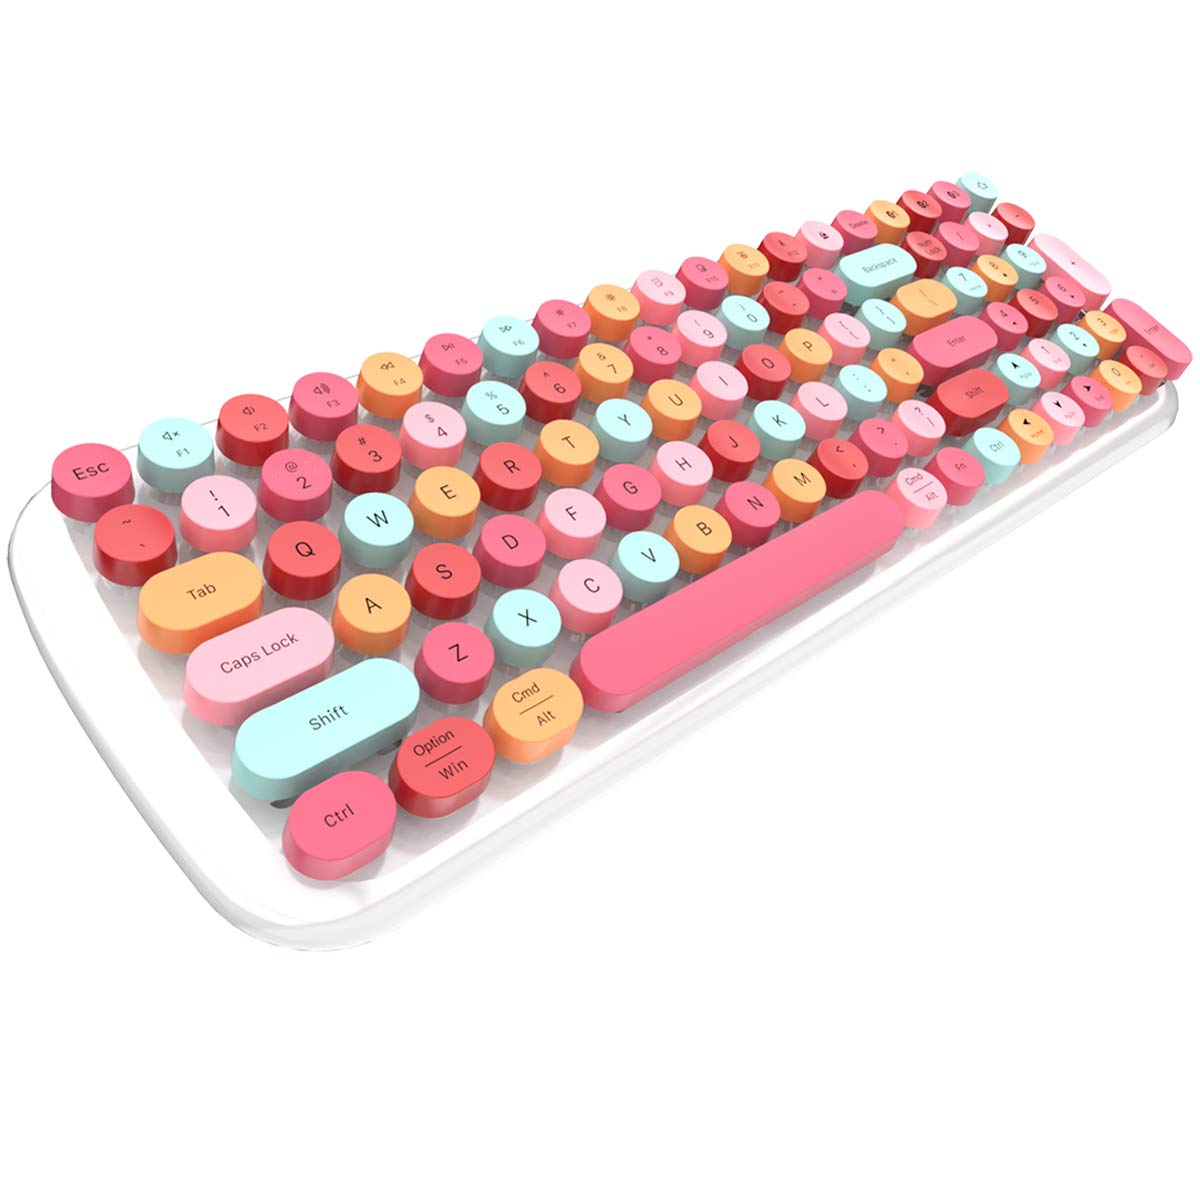 MOFii Bluetooth Keyboard, Wireless Connect 3 Bluetooth Devices, Colorful Retro Round Keys Cute Typewriter Keyboard for iPad, Laptop, PC, Smartphone...